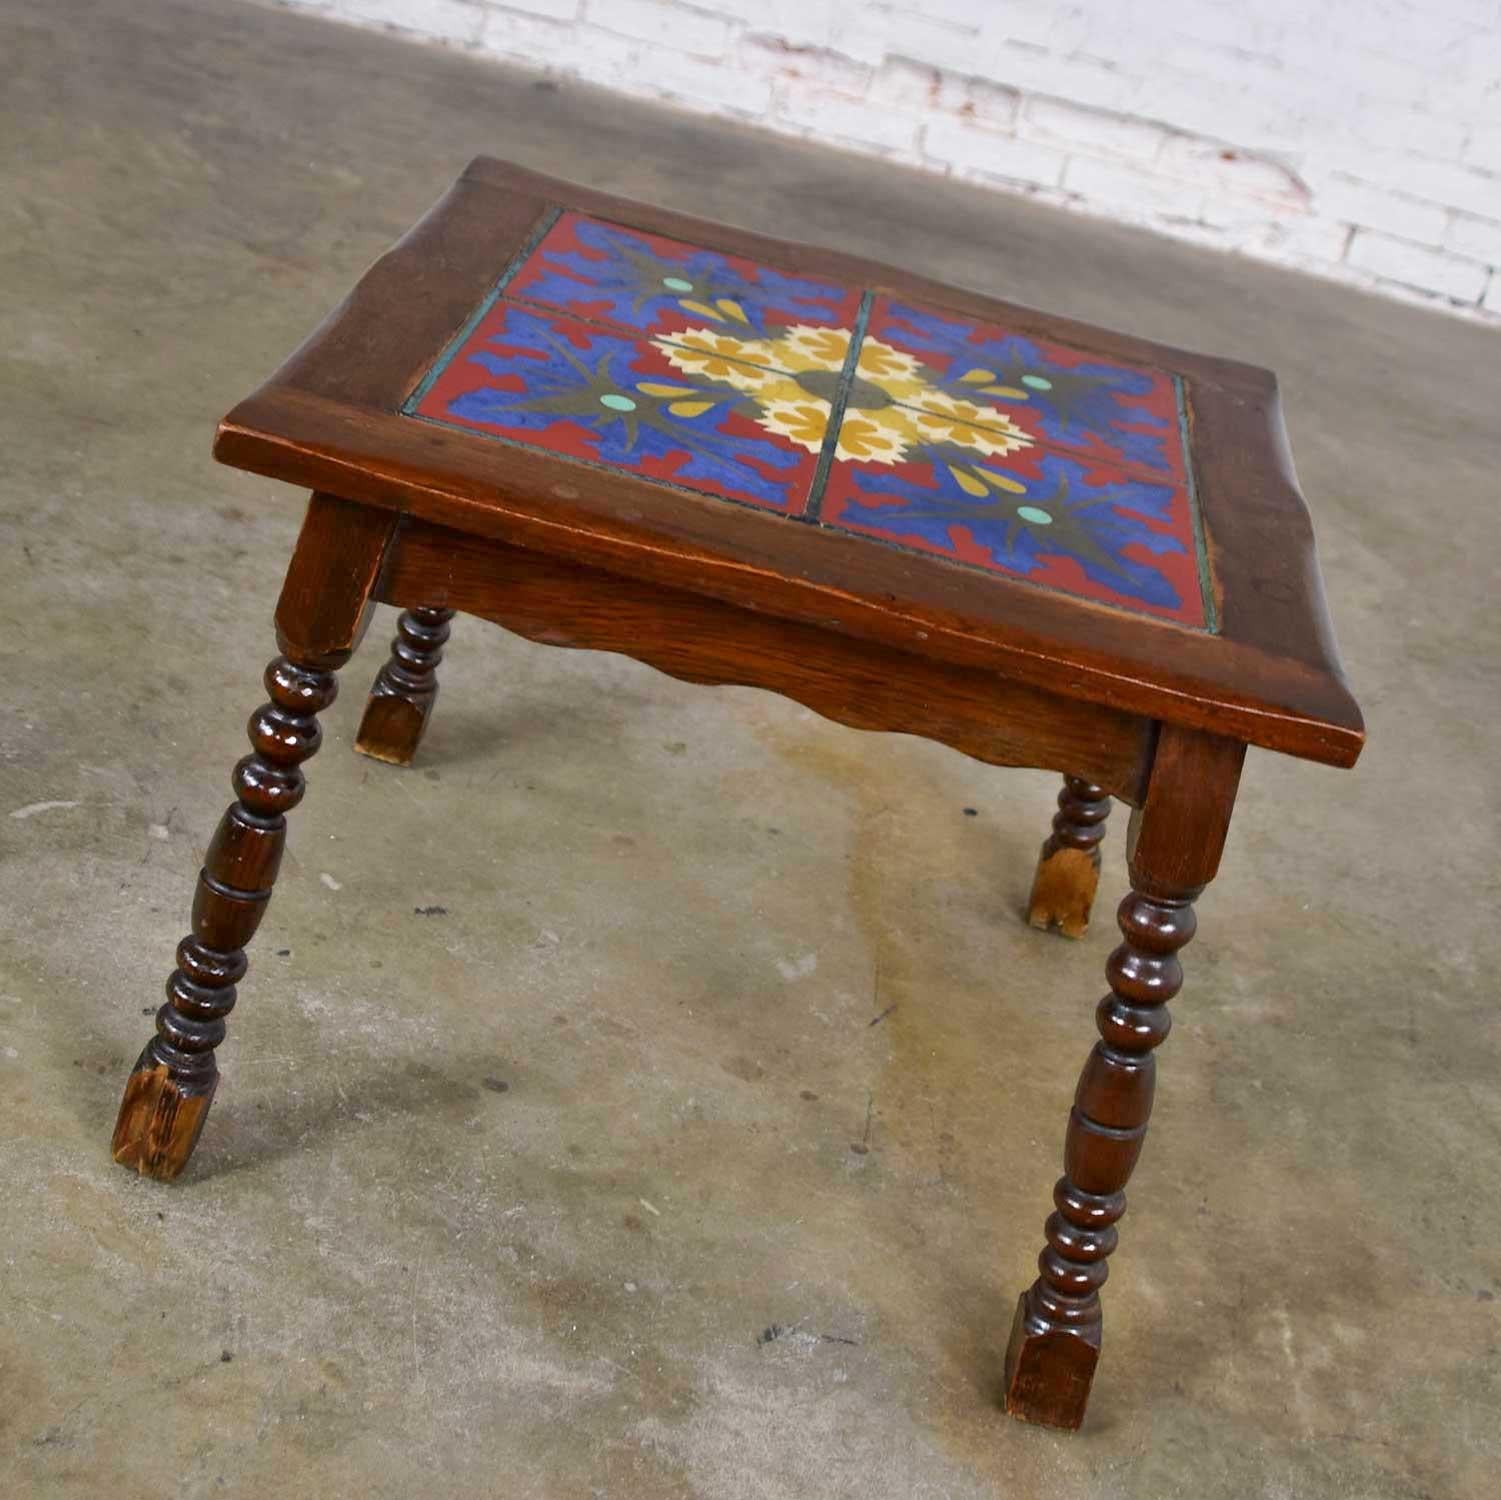 Gorgeous Catalina, California, Taylor, or Mission Arts & Crafts style Spanish tile top side or end table. Comprised of a square top with four ceramic tiles inlaid in an oak frame and turned legs. It is in wonderful vintage condition. The wood